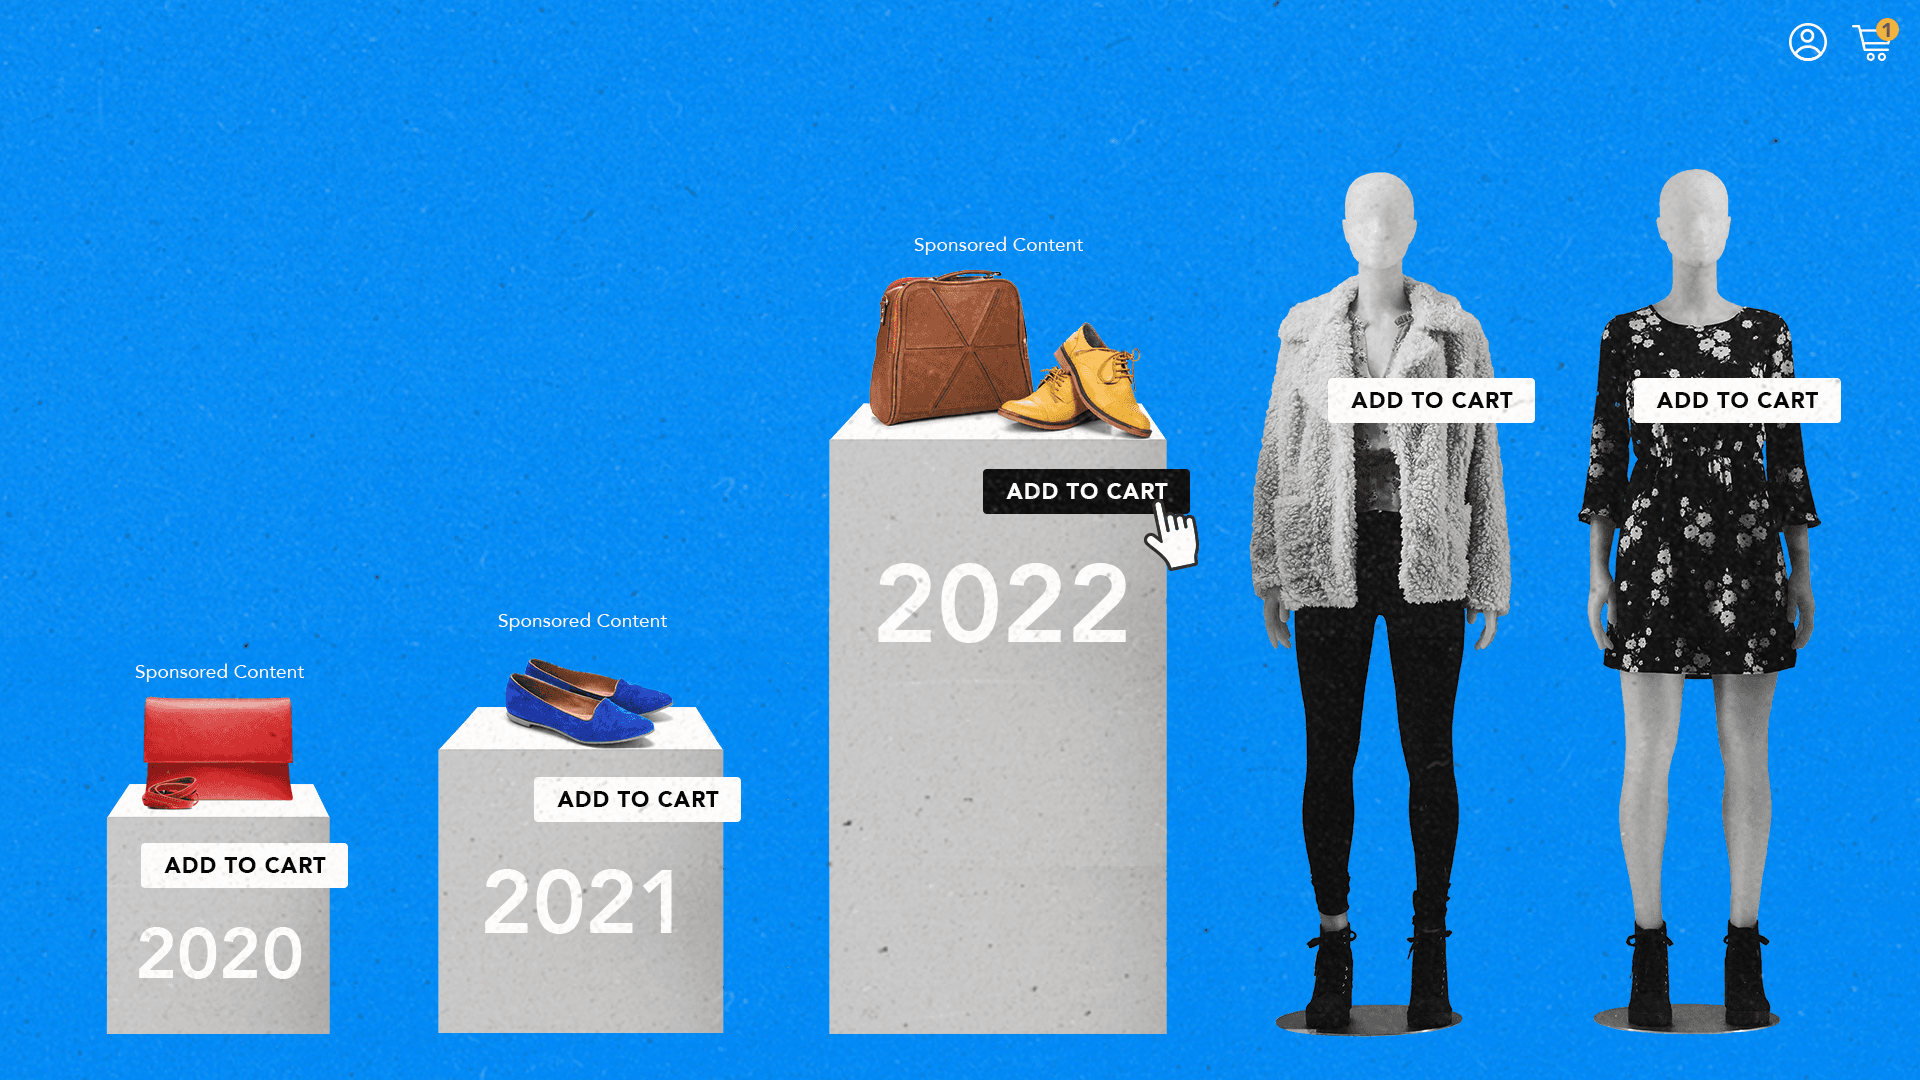 Retail media is set to surge in 2022. But what's driving this boom?